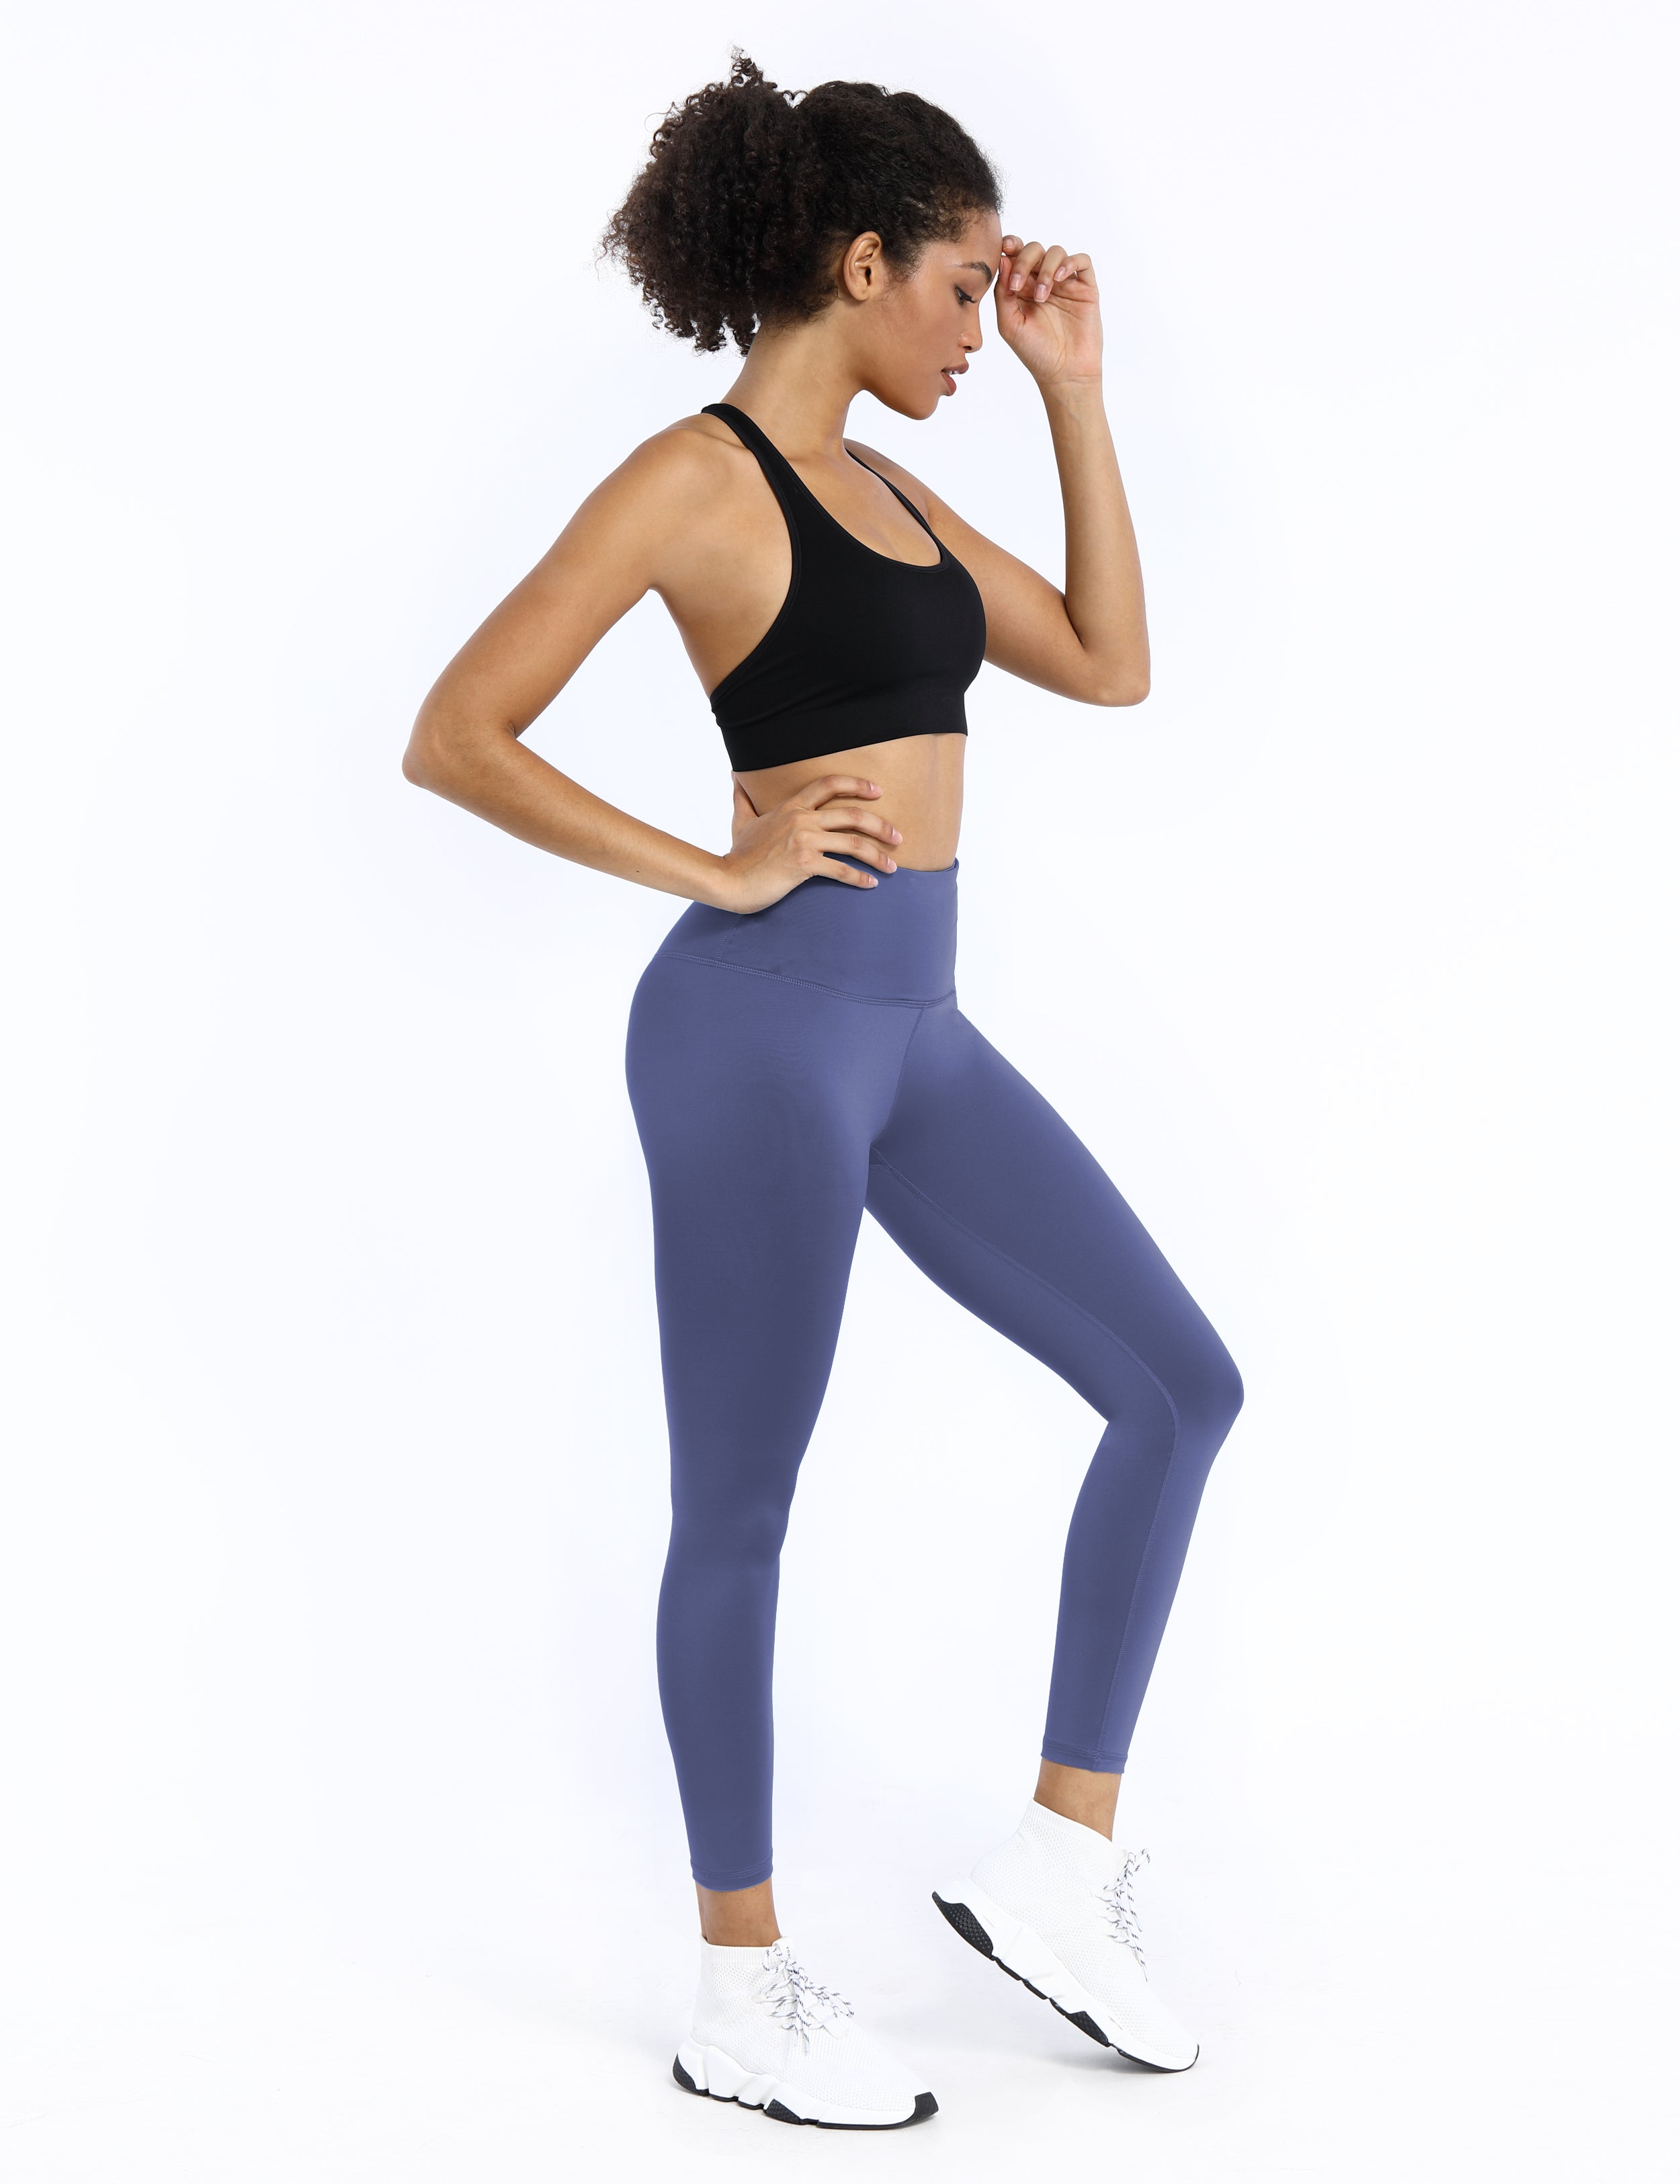 Womens Naked Body Shaping Bubblelime Yoga Pants  For Outdoor Cycling  And Running Fitness Training With Abdominal Compression And Stretch  Enhancement From Jackwang777, $62.32